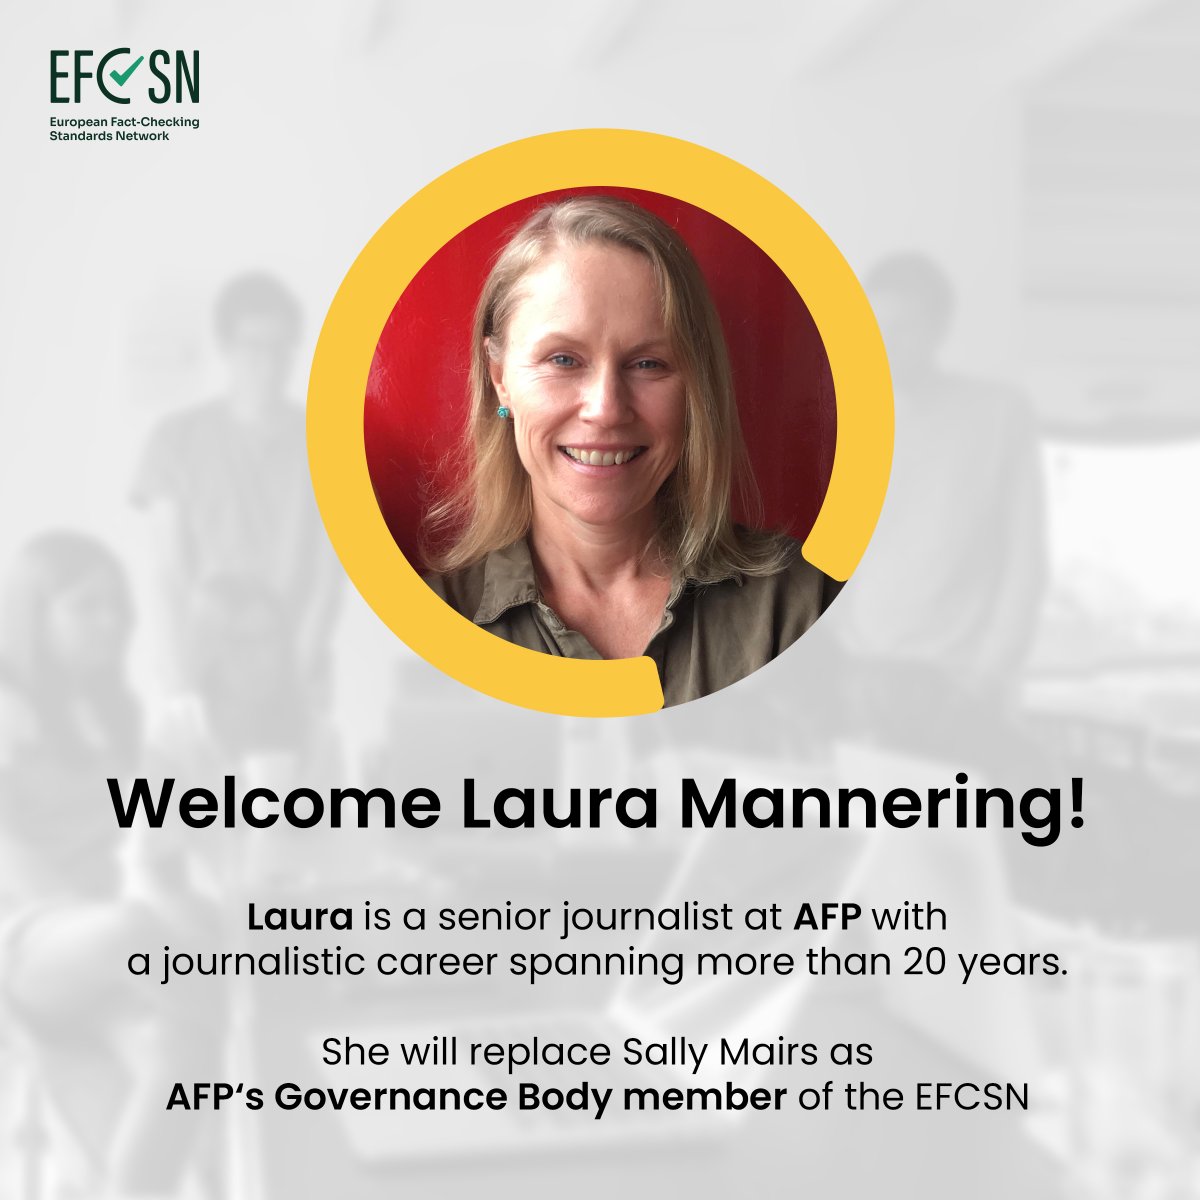 It is with a tearful eye that we say goodbye to @ssmairs, who is leaving AFP and the EFCSN's Governance Body to pursue new professional adventures. 👋

But it is with a smile that we welcome Laura Mannering as our new Governance Body member for @AFP. Welcome @LauraMannering! 🎉